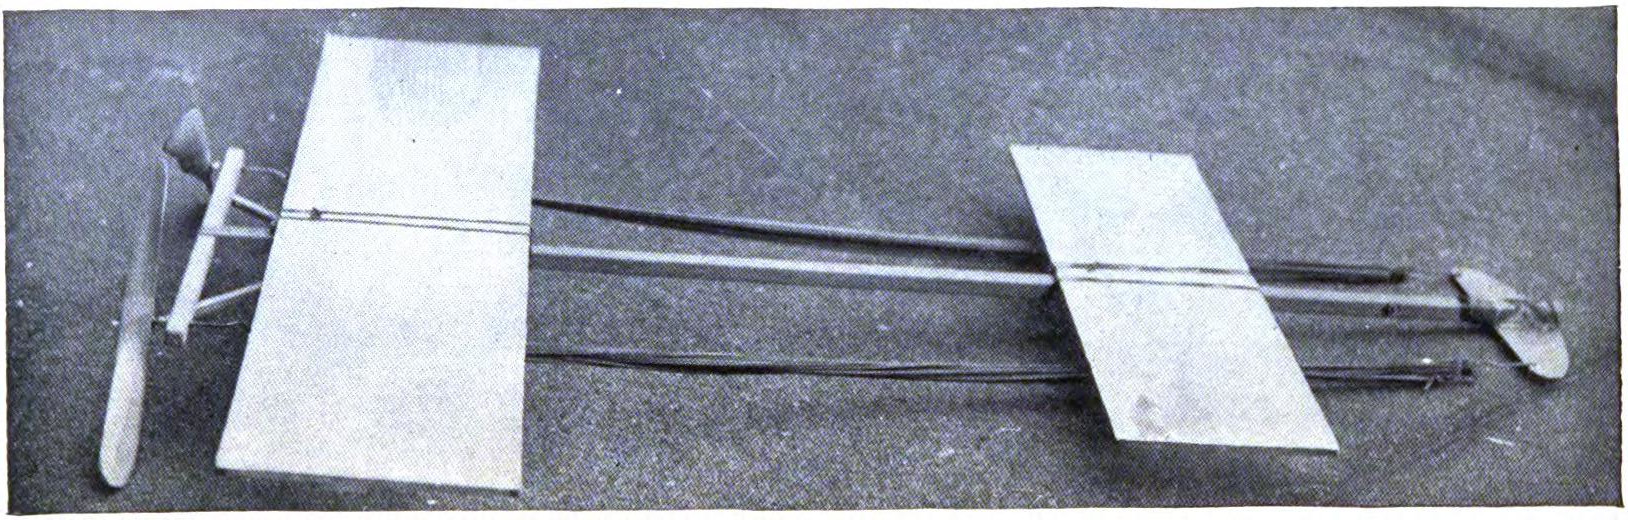 One of the earlier models built by Cecil Peoli